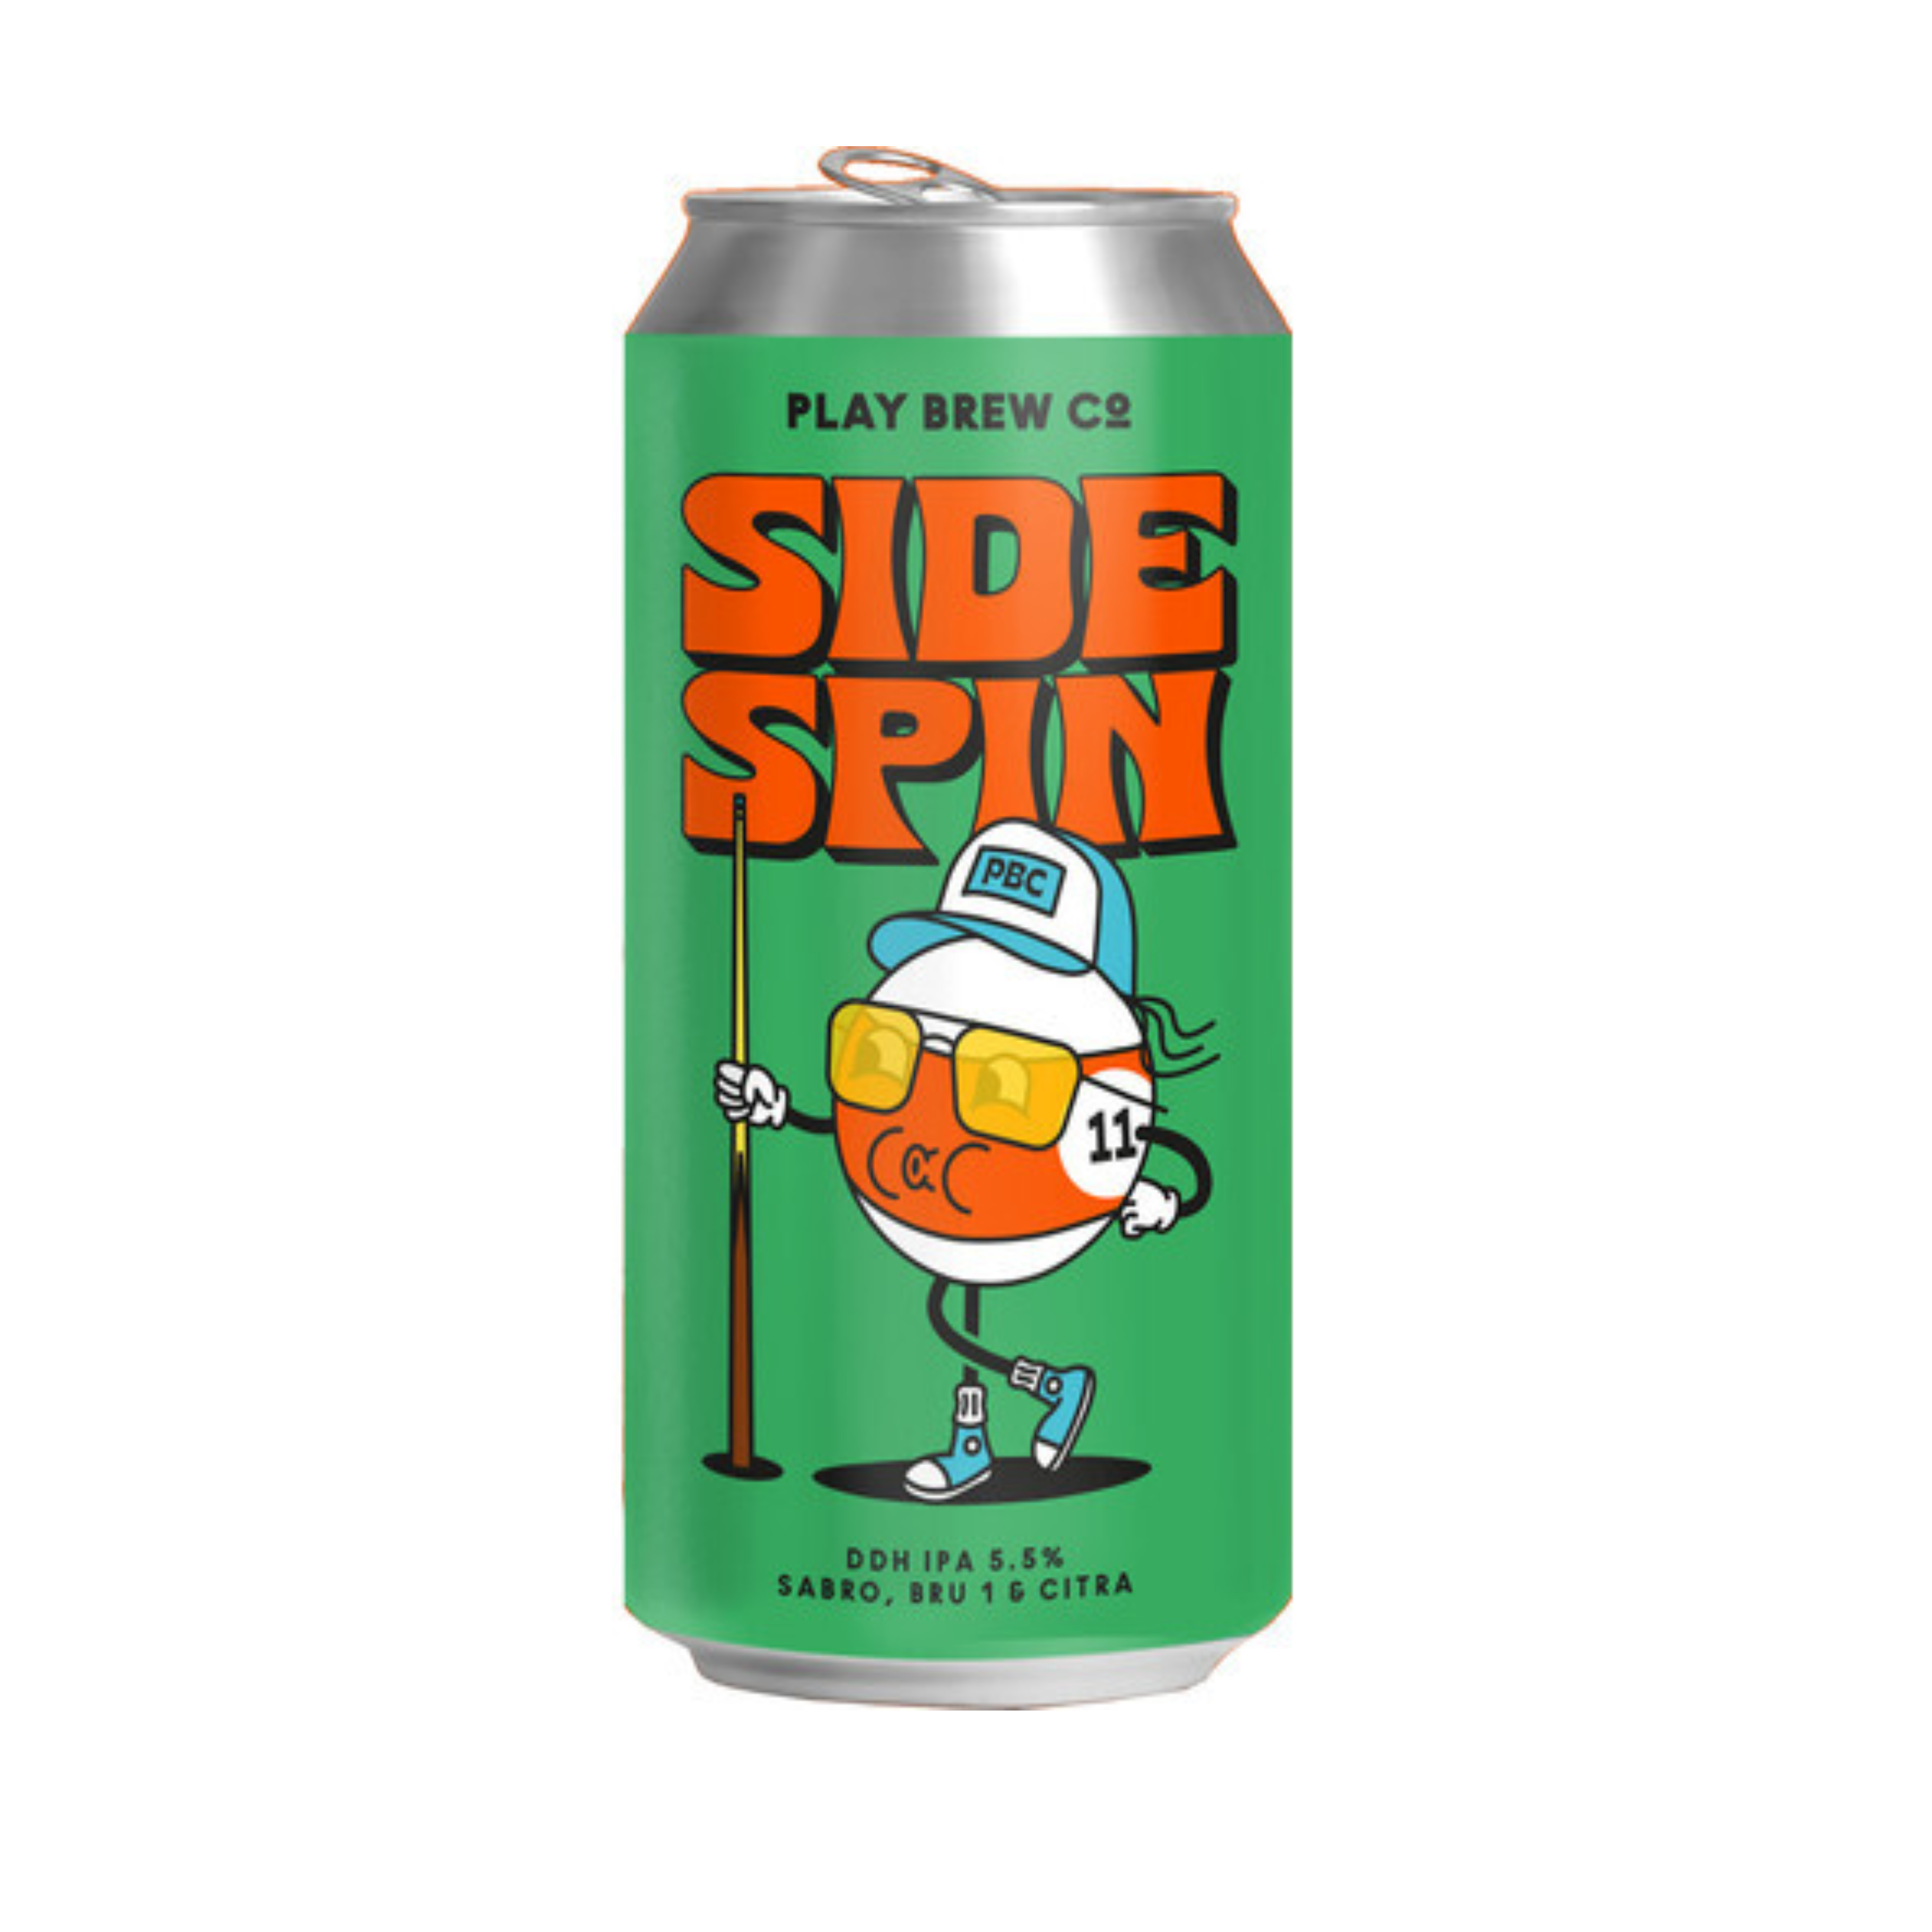 Play Brew Co Side Spin 5.5%